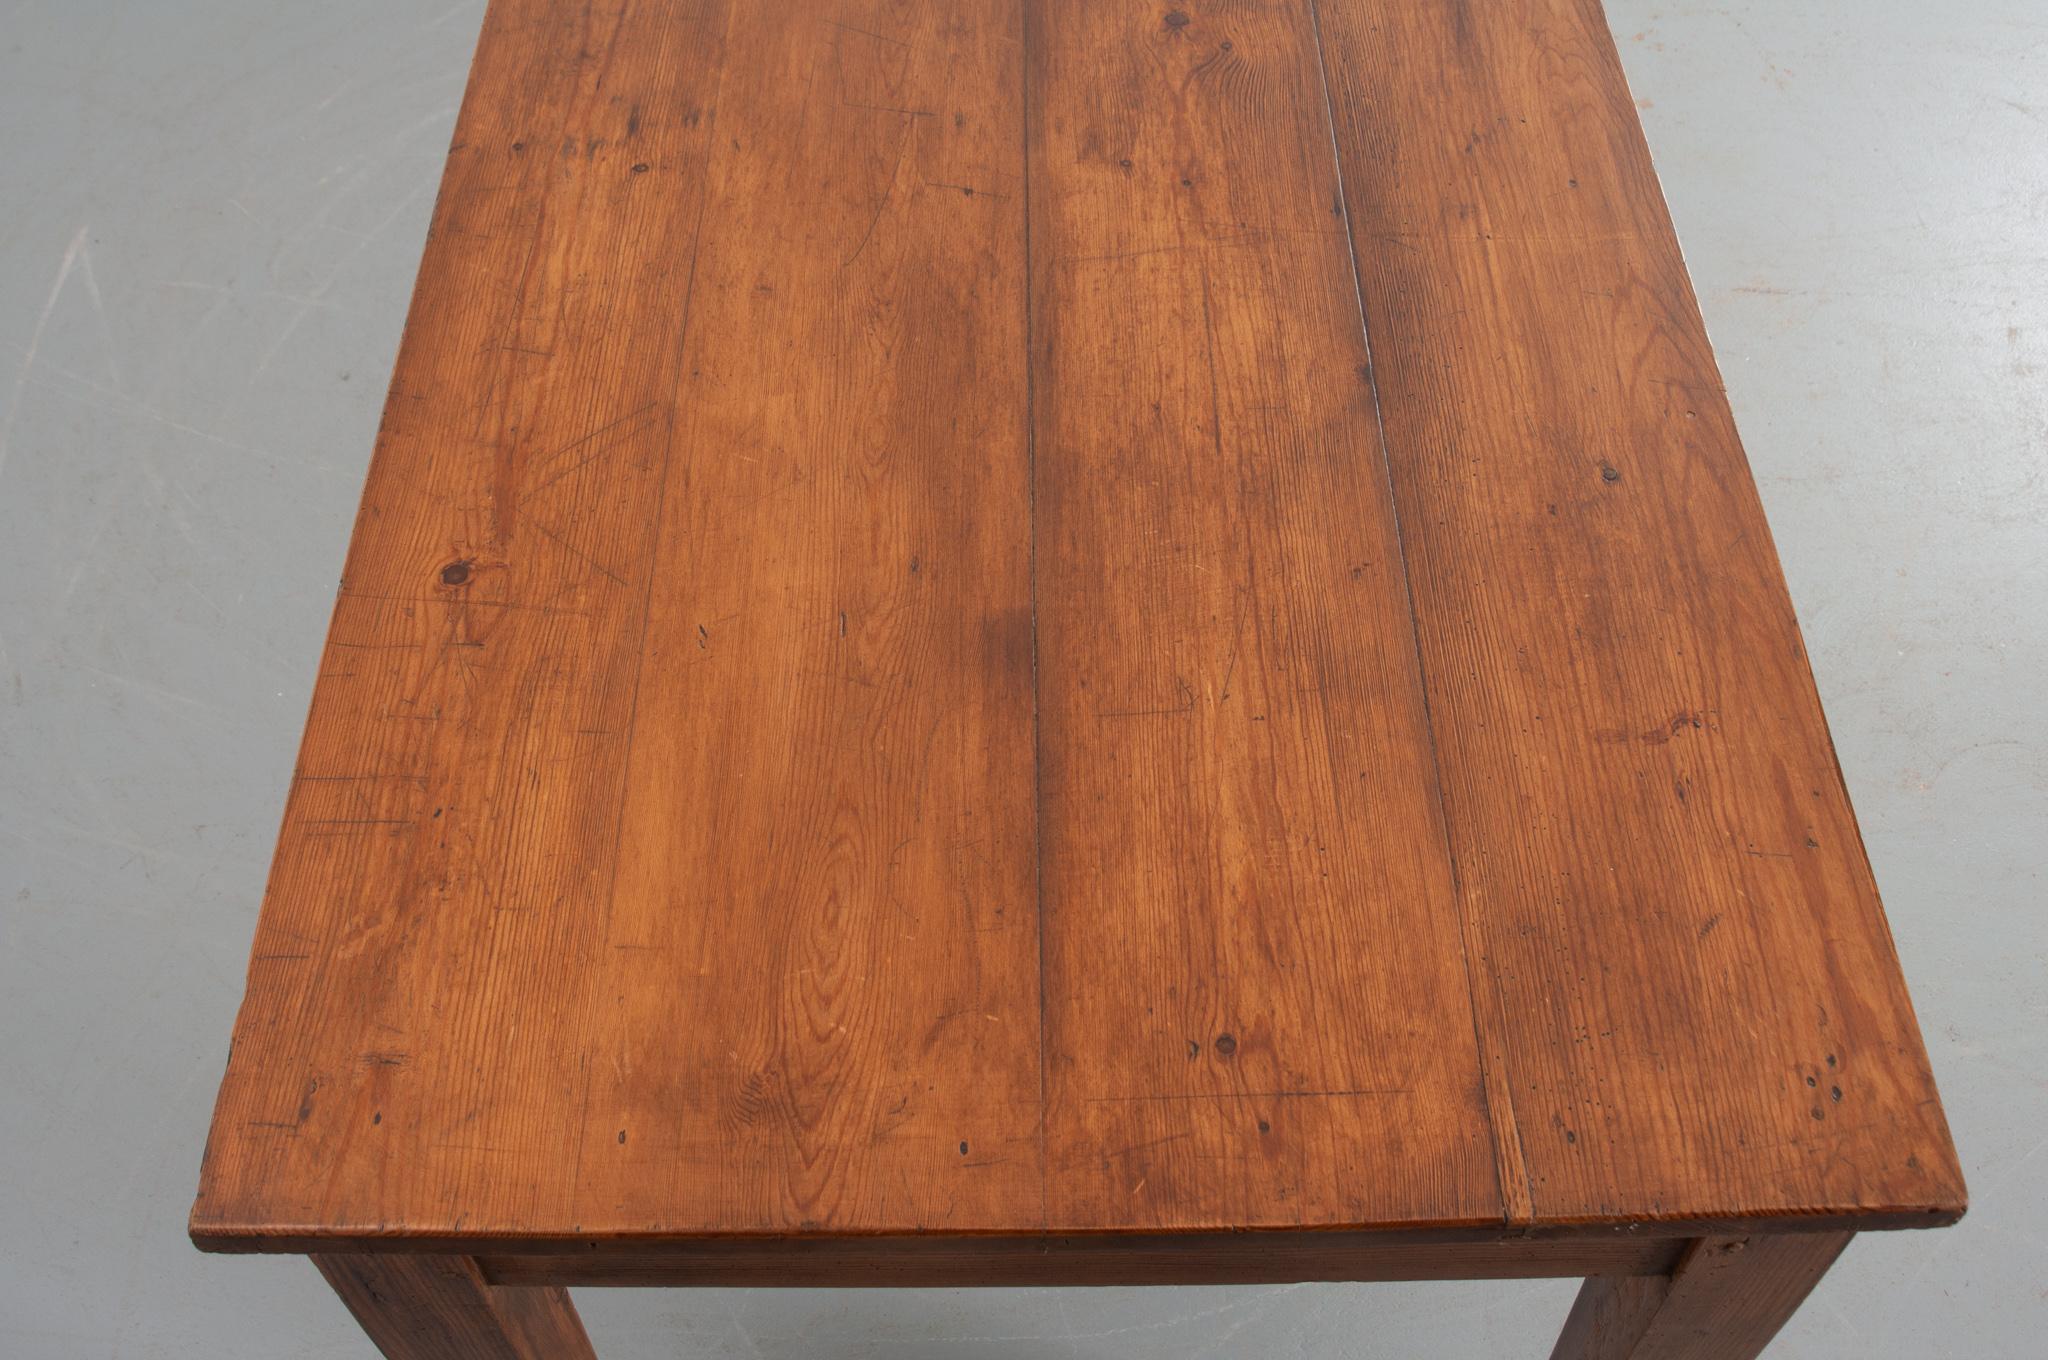 This beautiful French farm table is perfect as a dining room table because of its great length, fitting between ten to twelve chairs. Four pine planks compose the surface, full of character with a great patina, and sits atop a one drawered apron.